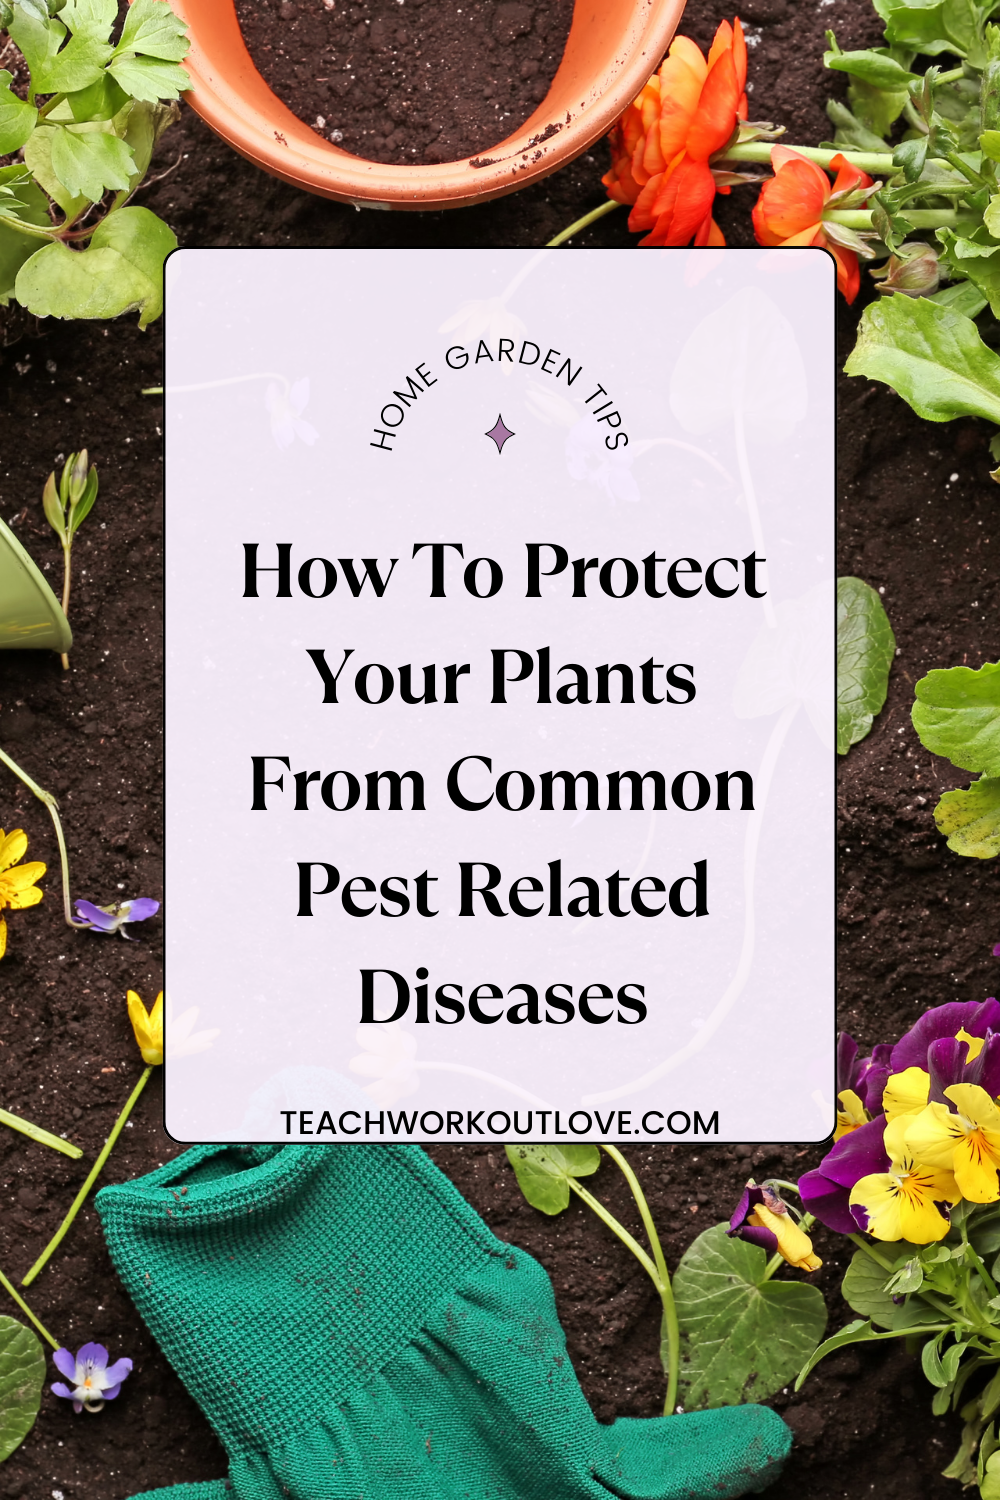 Below, we’ve covered some common pest-related plant diseases and how to protect your plants as much as possible with garden pest prevention methods.